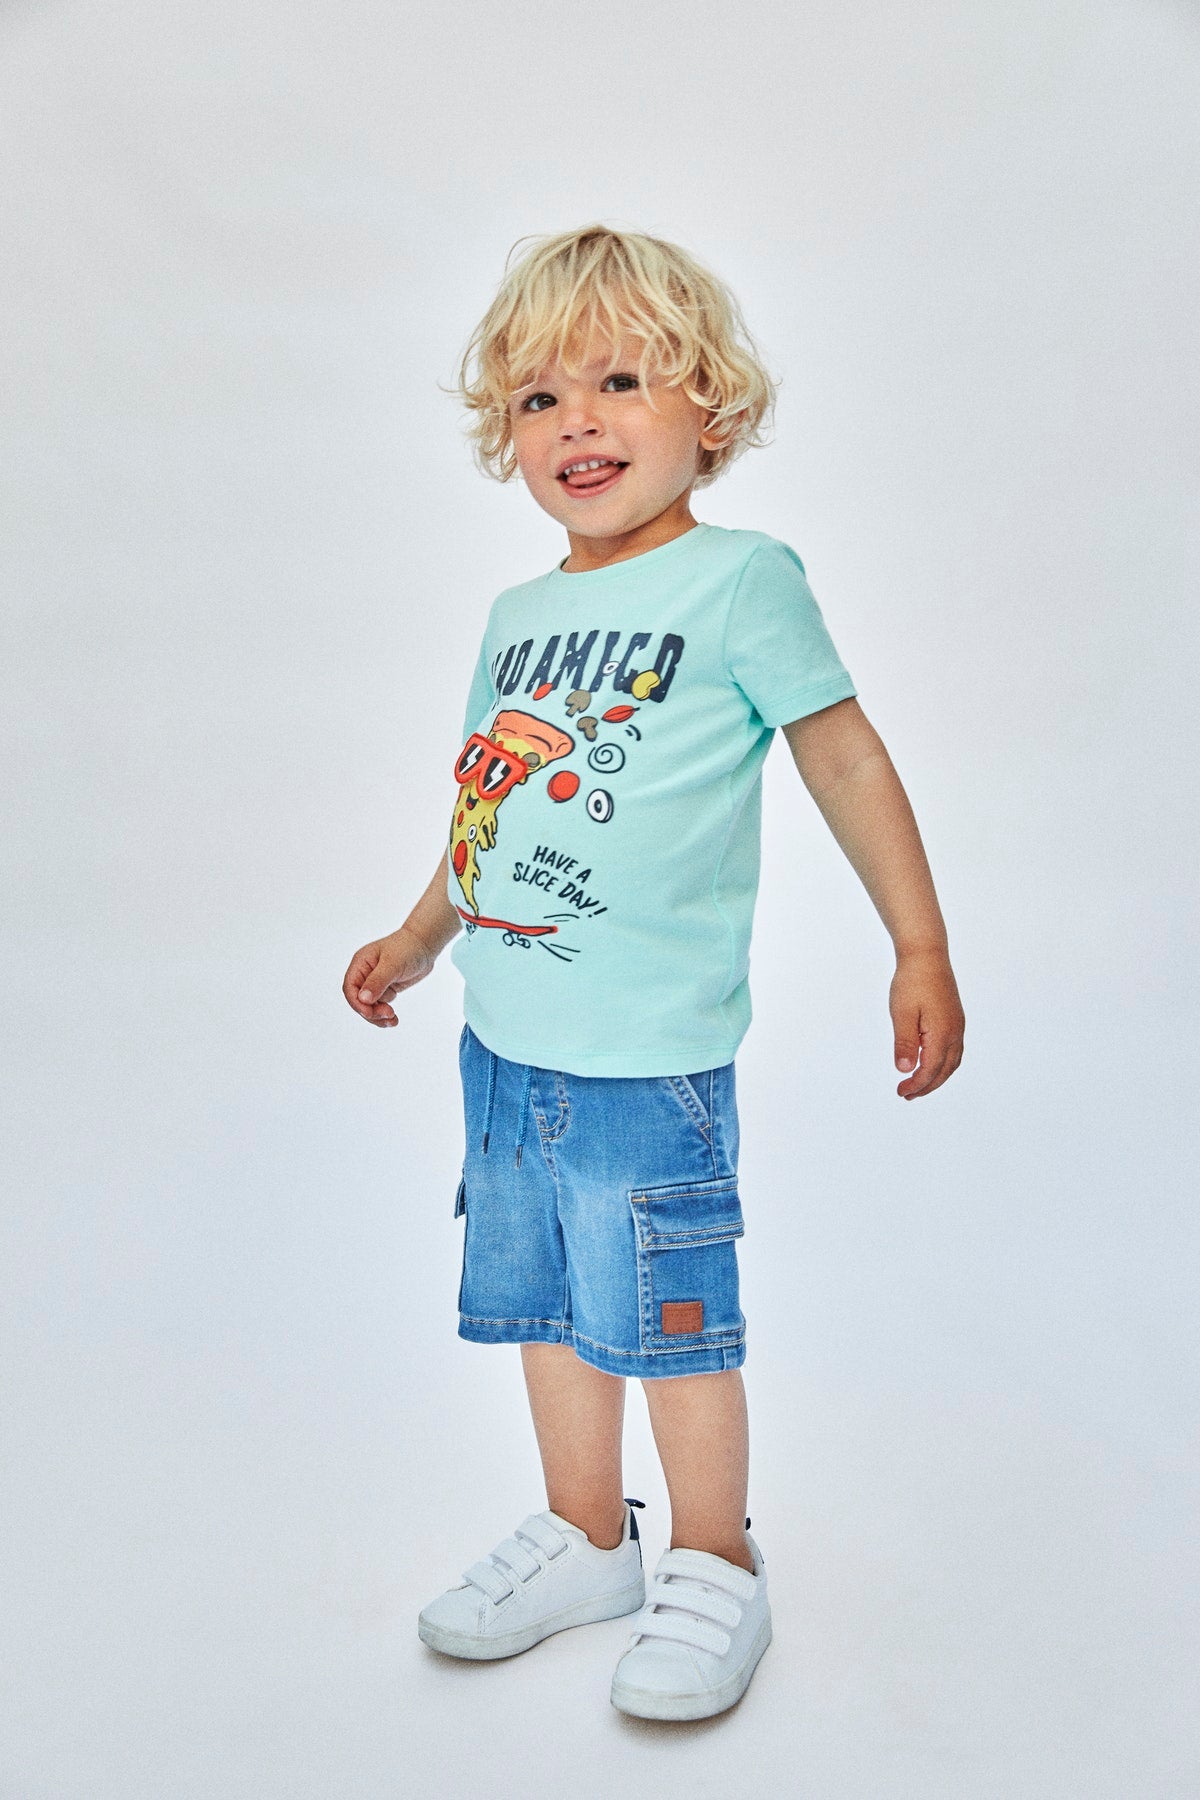 name it toddler boy turquoise t-shirt with pizza slice print.